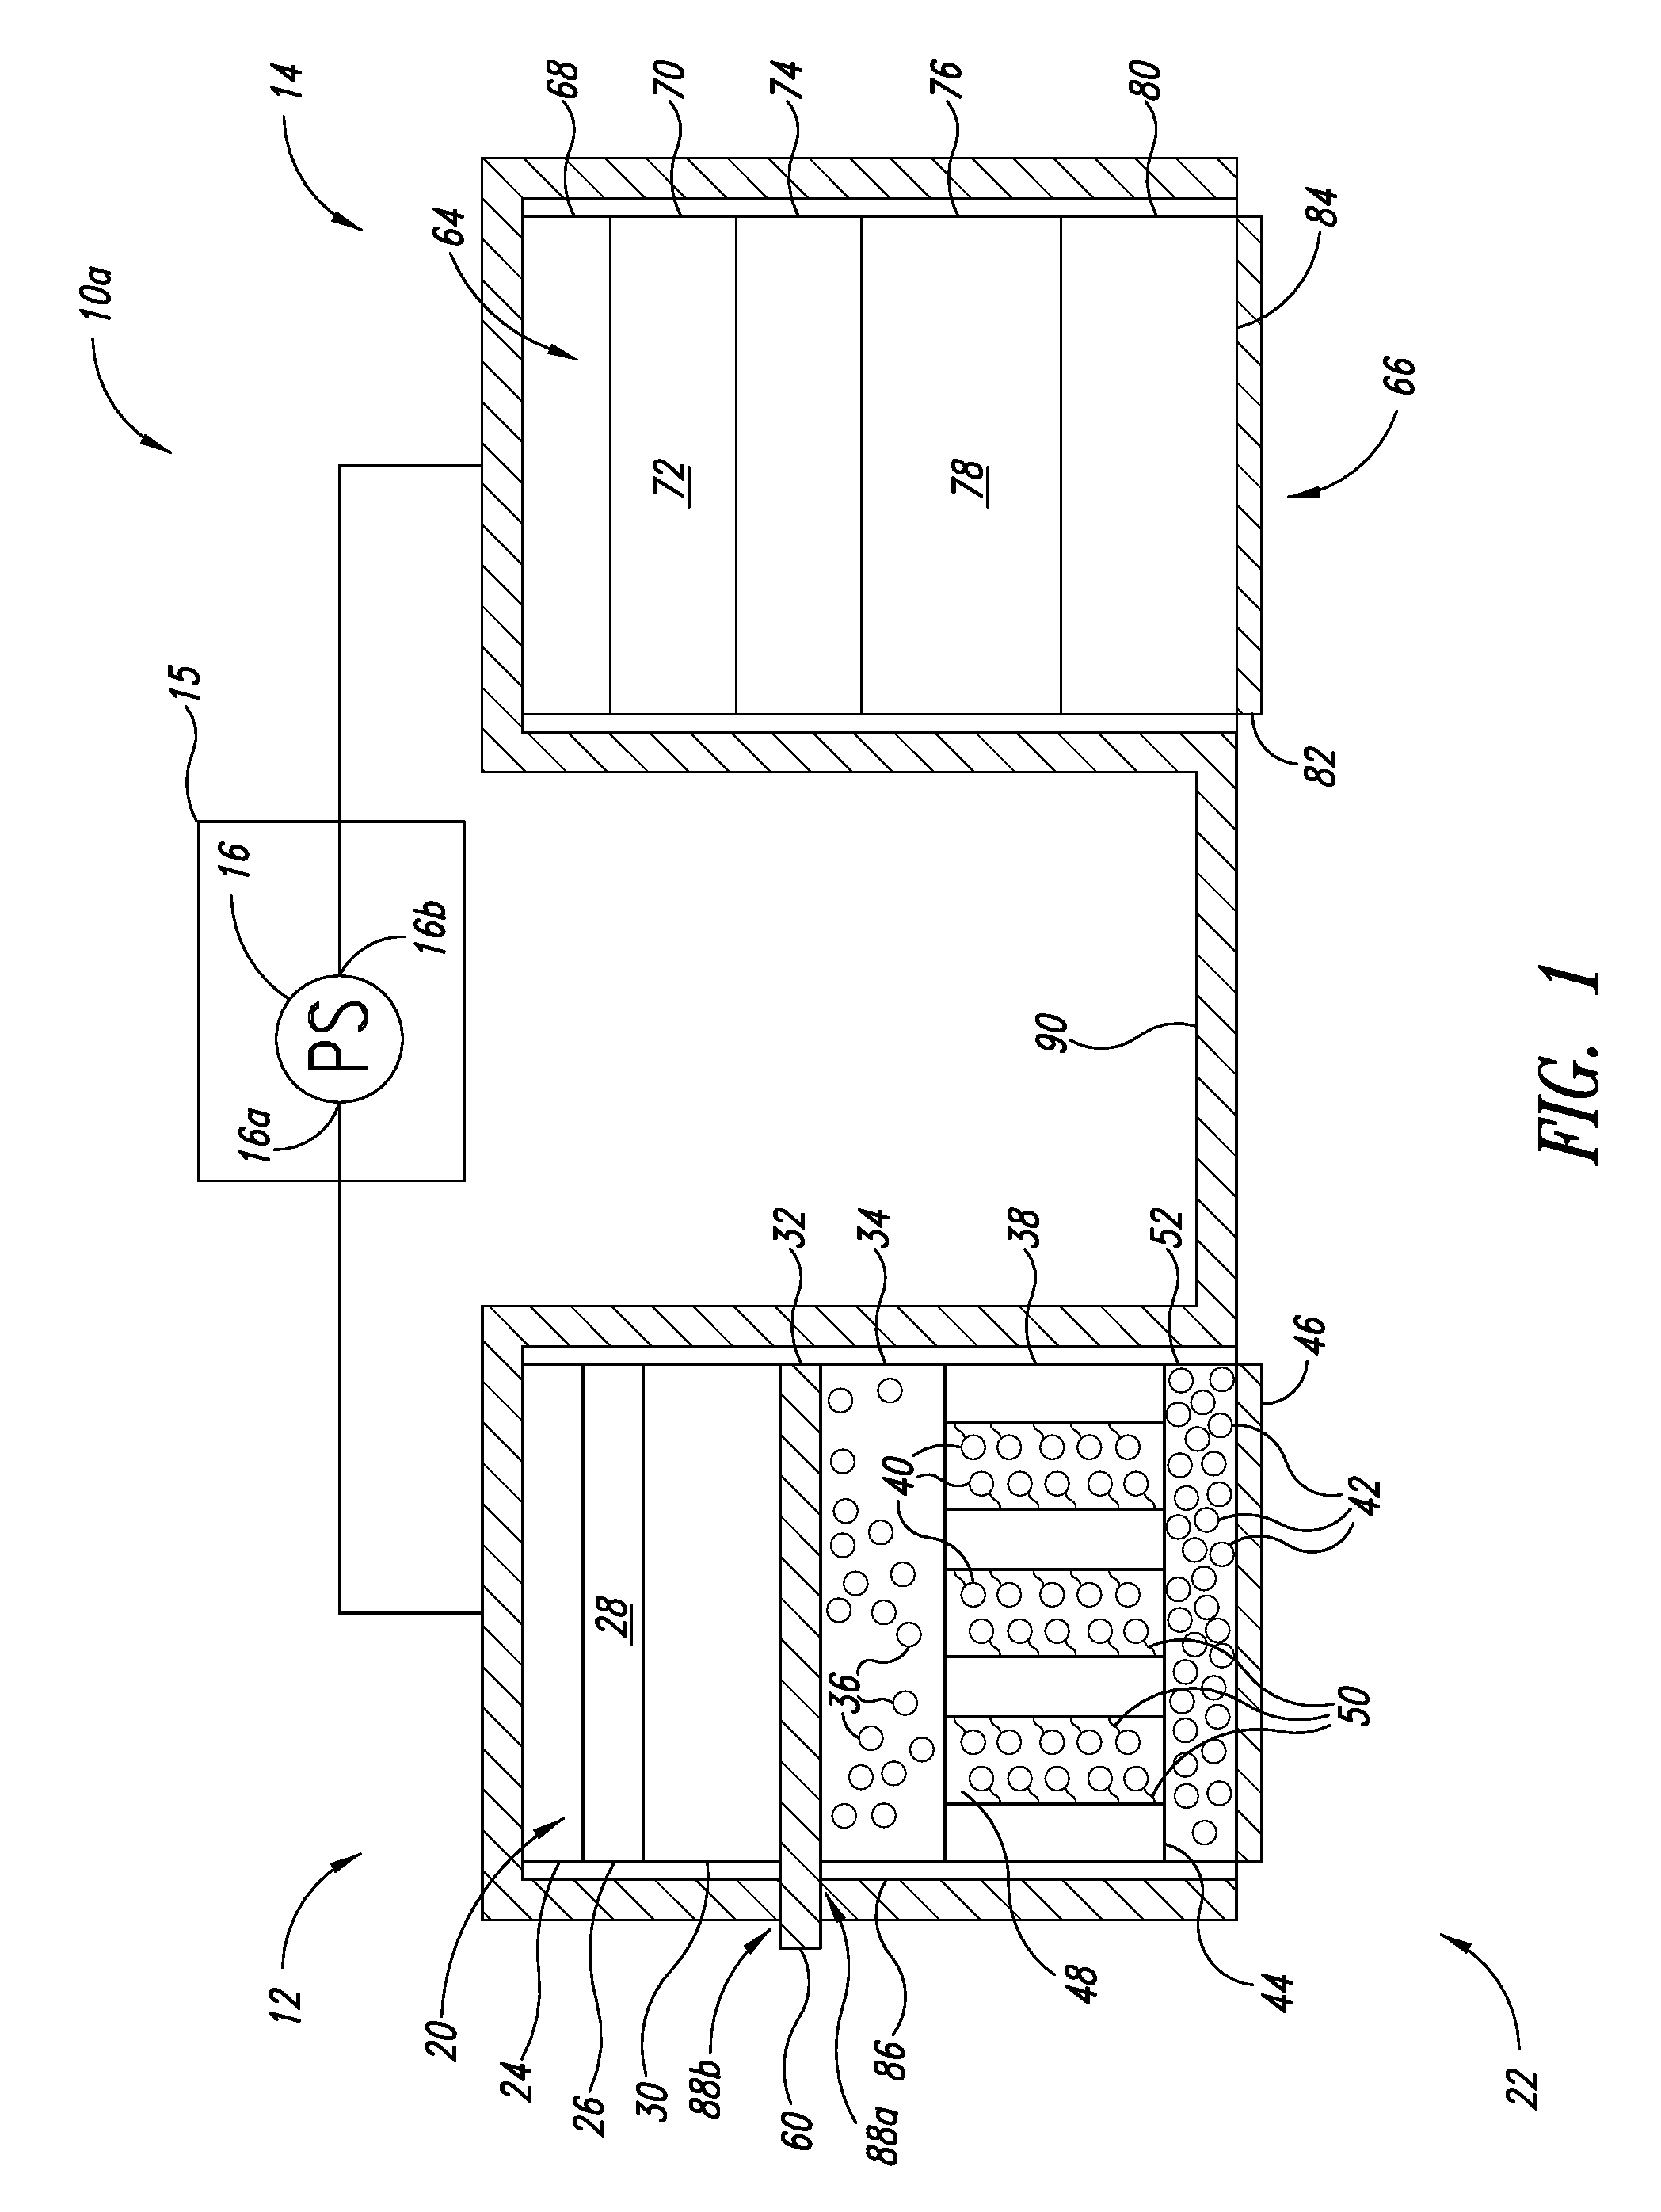 Method and system to detect malfunctions in an iontophoresis device that delivers active agents to biological interfaces